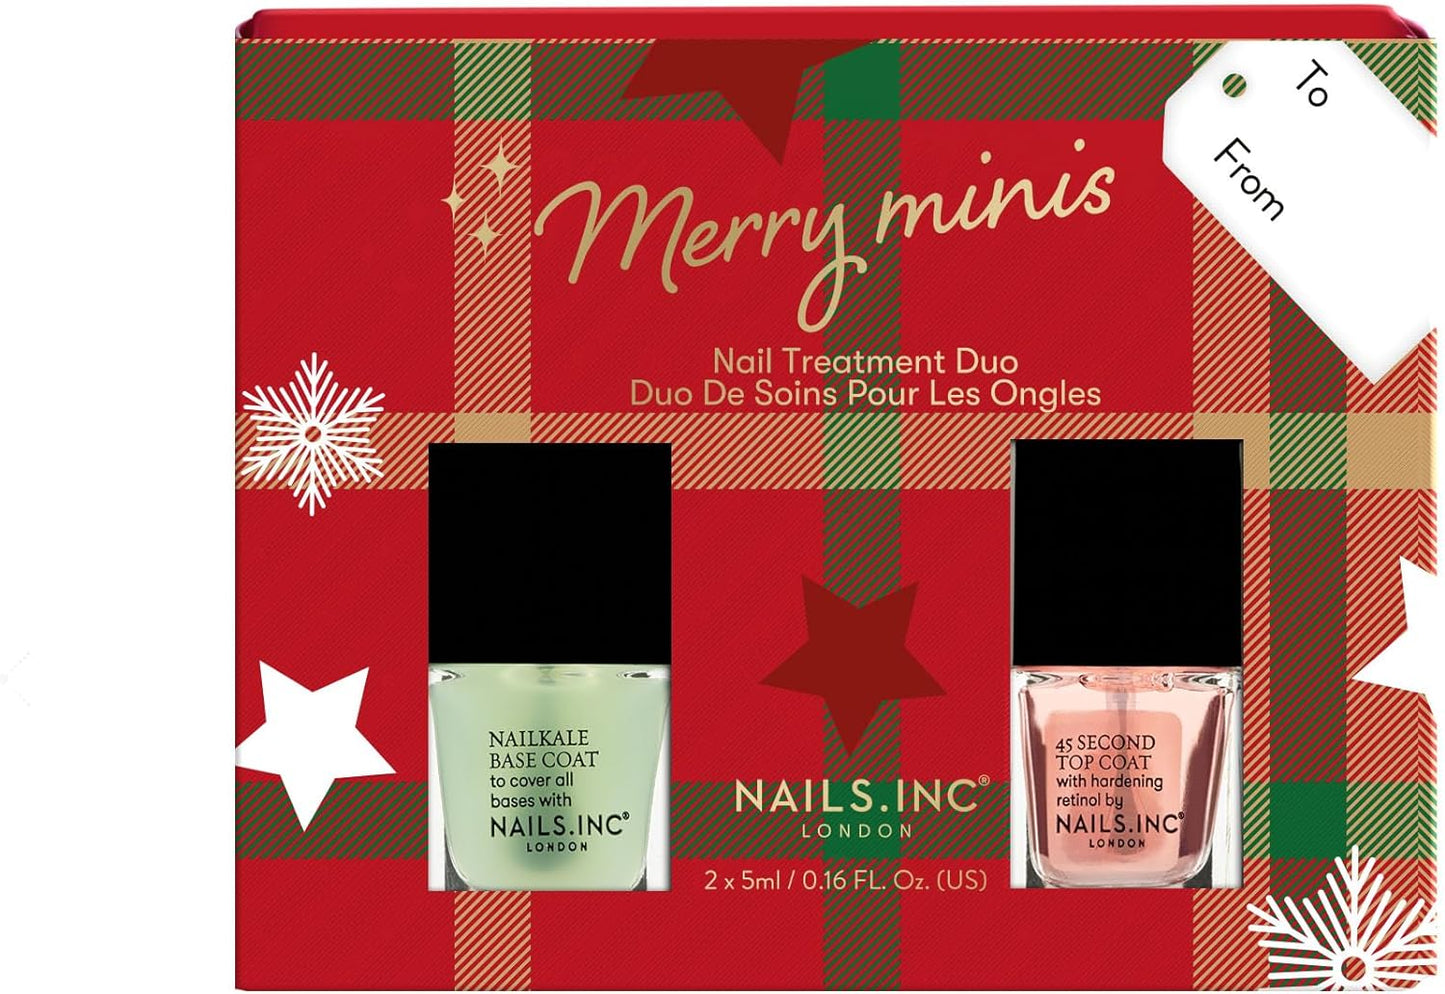 Load image into Gallery viewer, Nails.INC Merry Minis Treatment Duo
